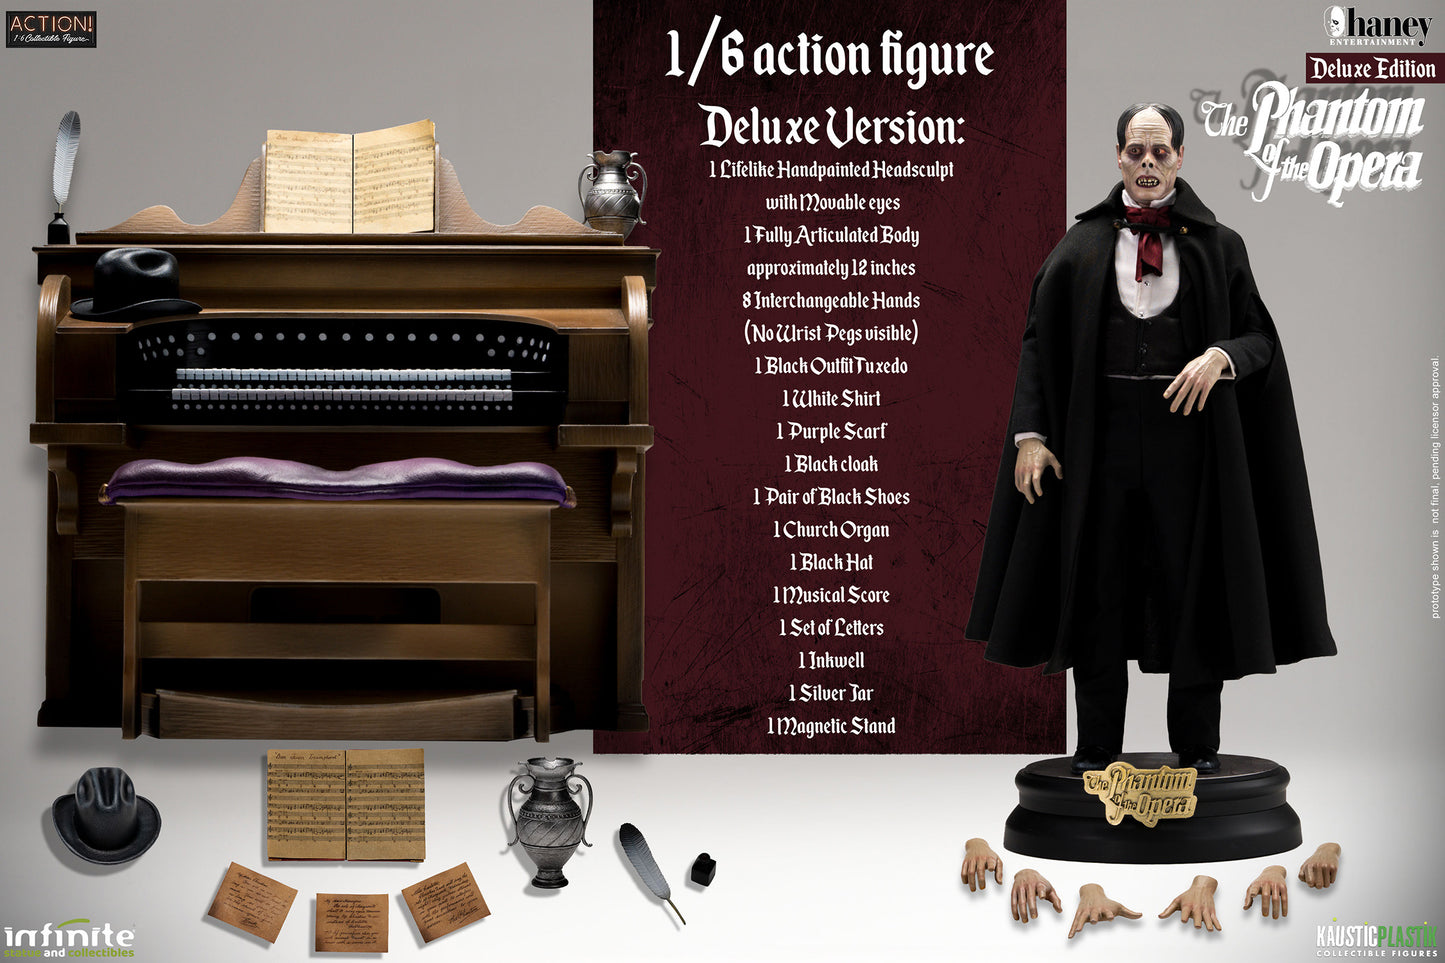 PRE-ORDER Lon Chaney as Phantom of the Opera Deluxe Sixth Scale Figure